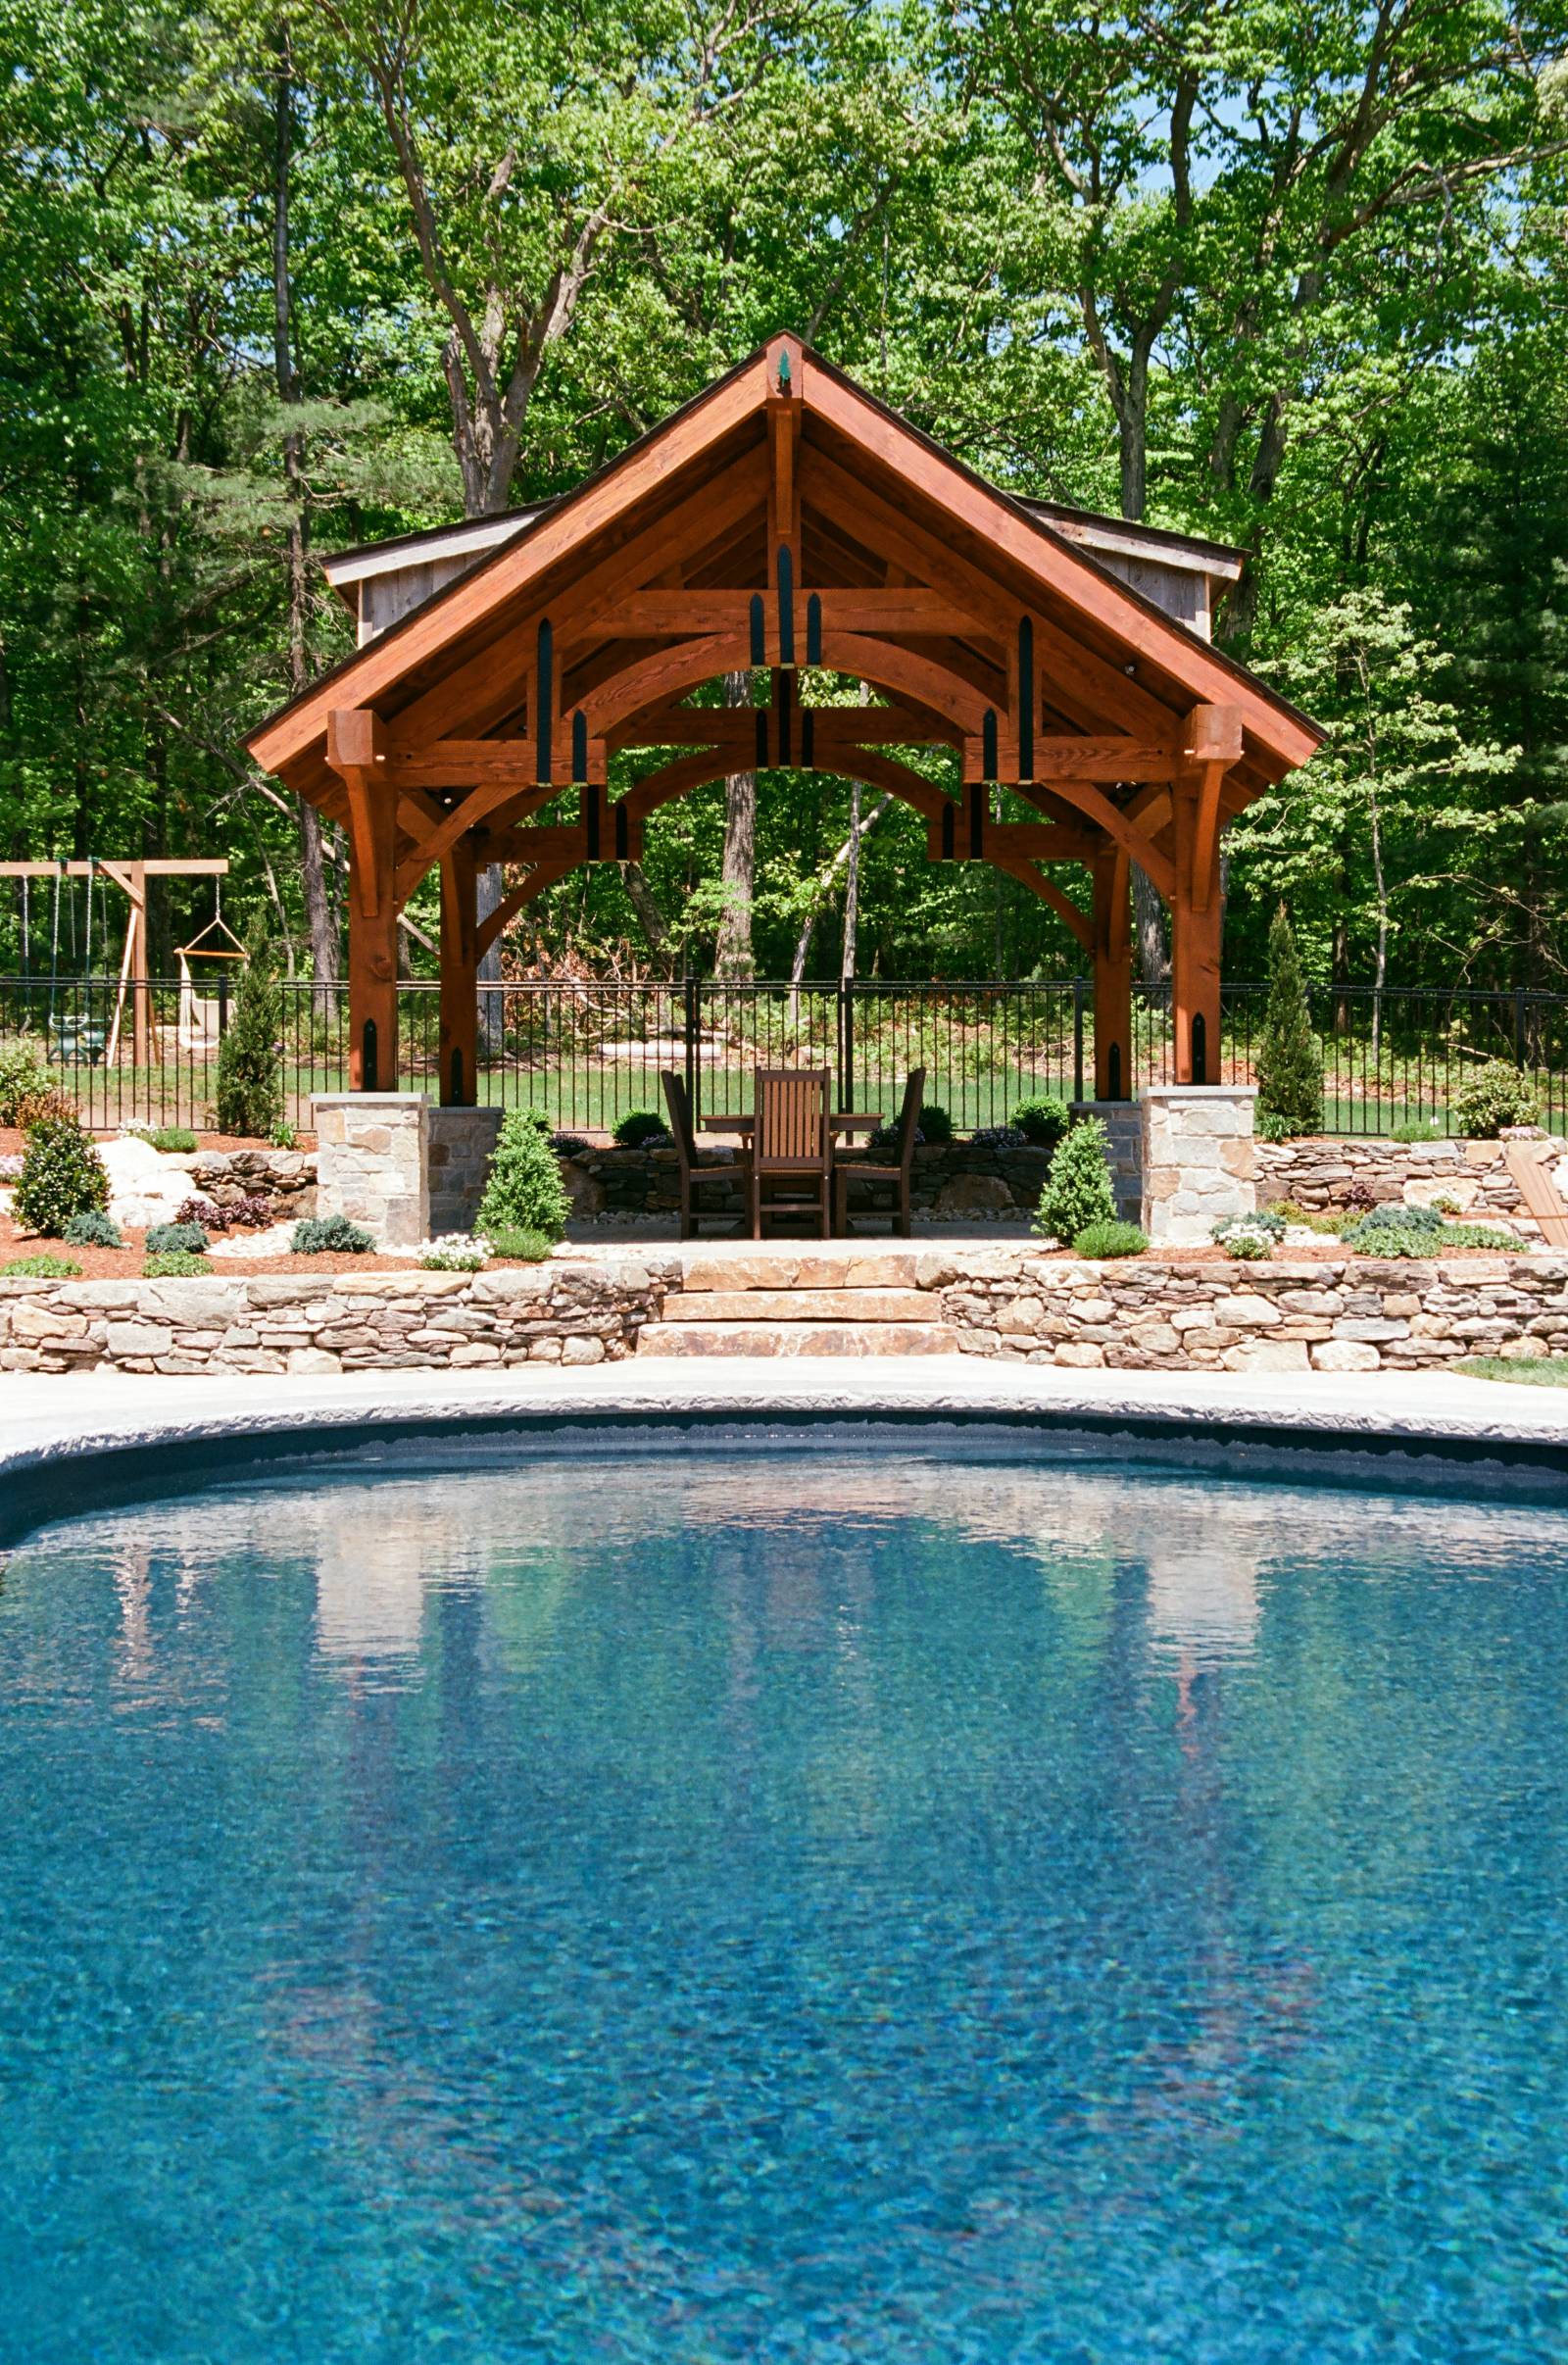 Front View of the Alpine Timber Frame Pavilion by a Pool